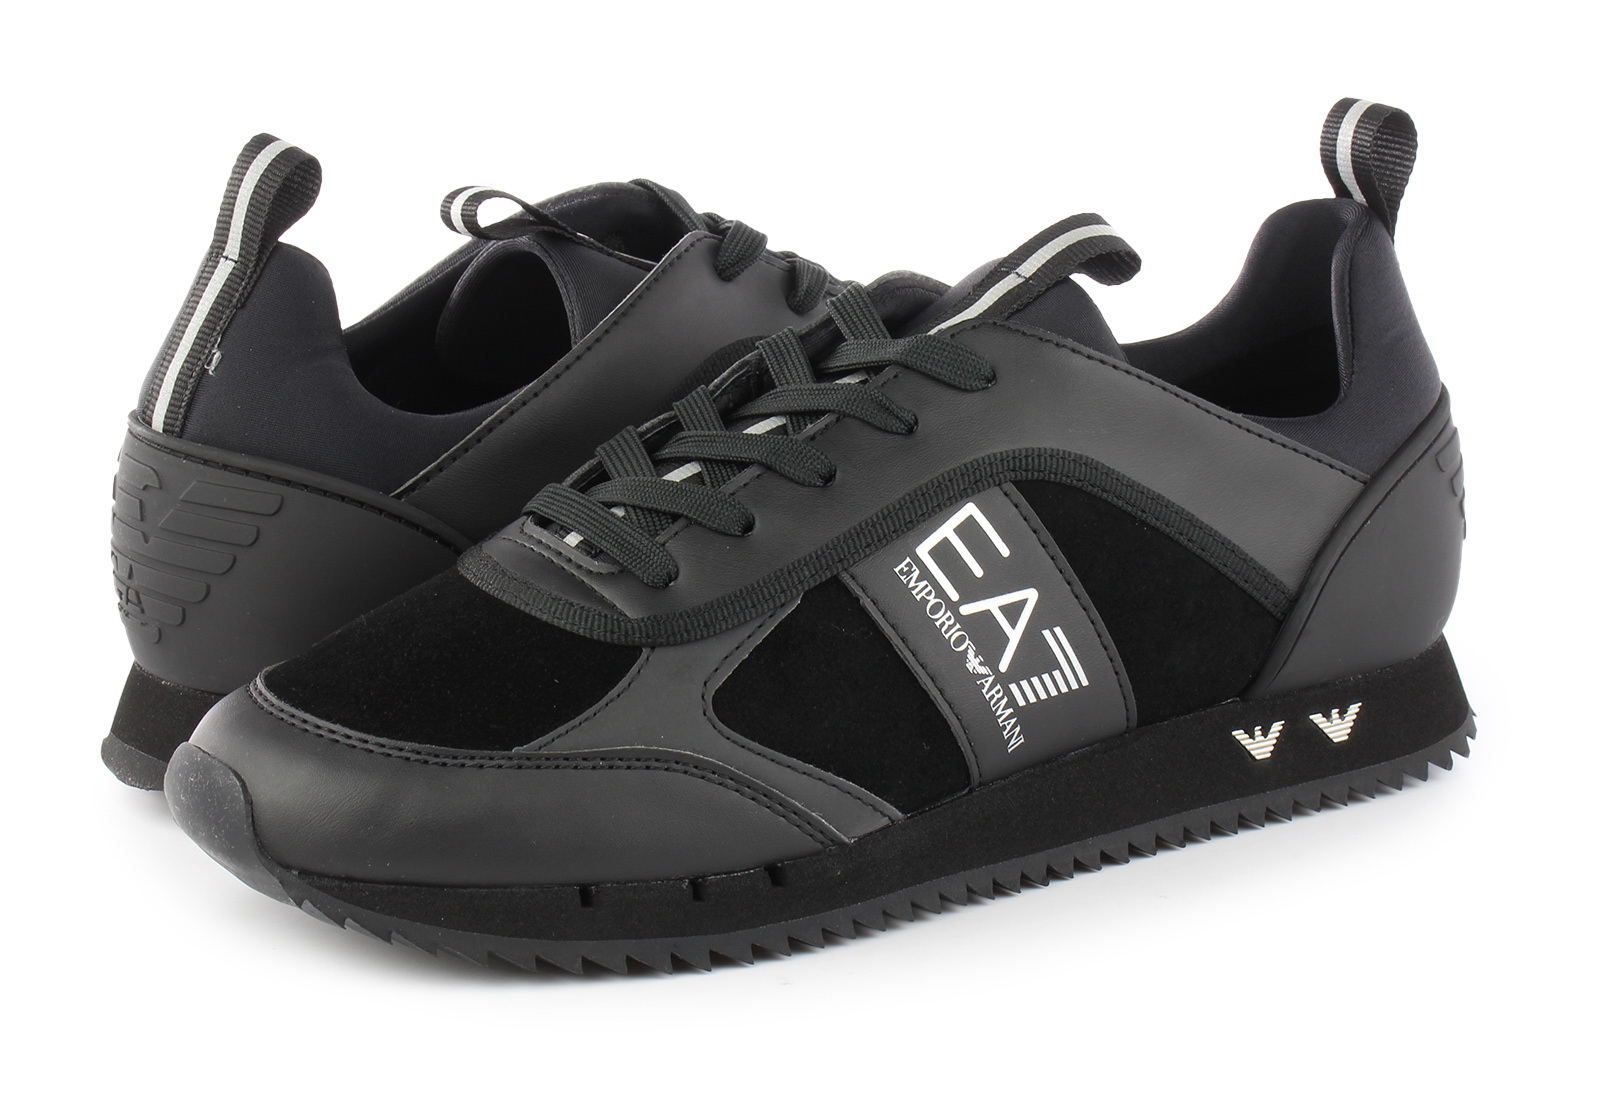 EA7 Emporio Armani Sneakers - Suede - XK173-X027-BLK - Online shop for  sneakers, shoes and boots